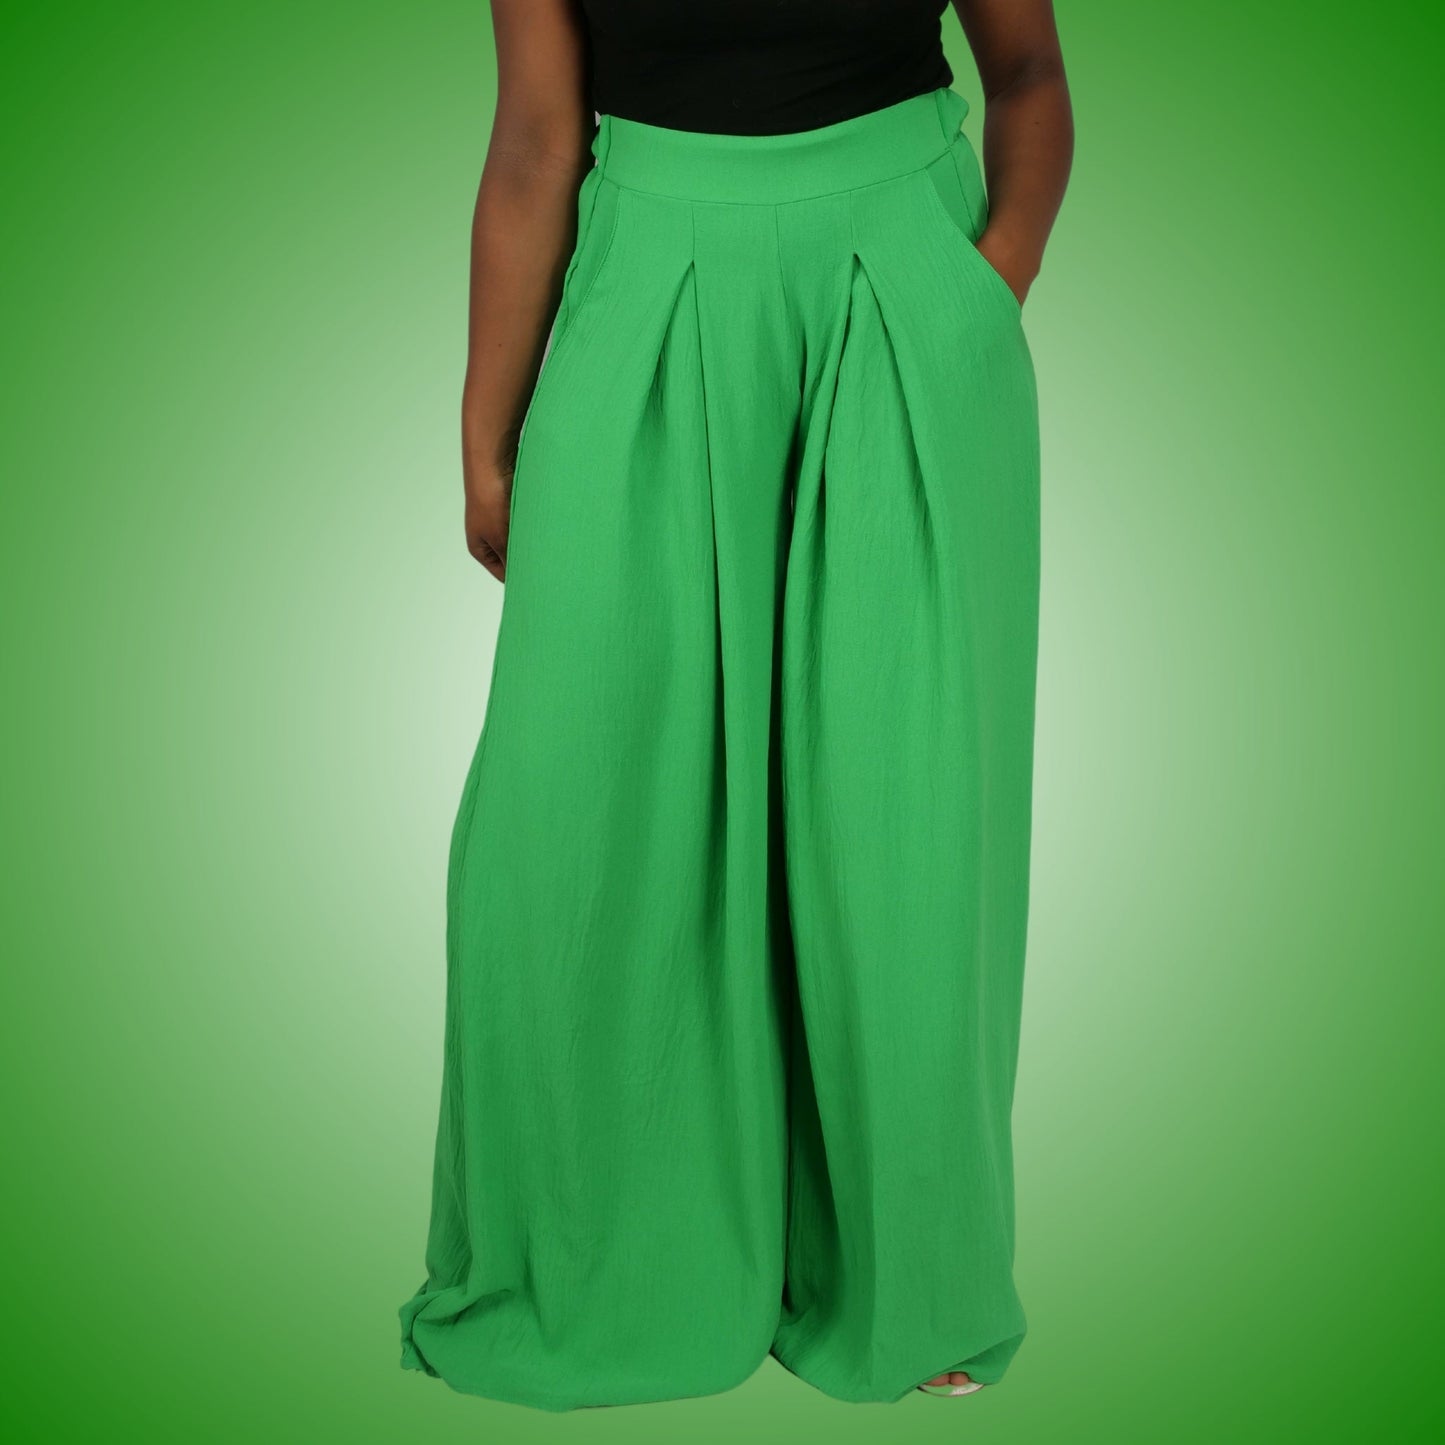 Go With The Flow Wide Leg Woman's Pants - Green Pants Mo'Nique Couture Fashions Small Green 